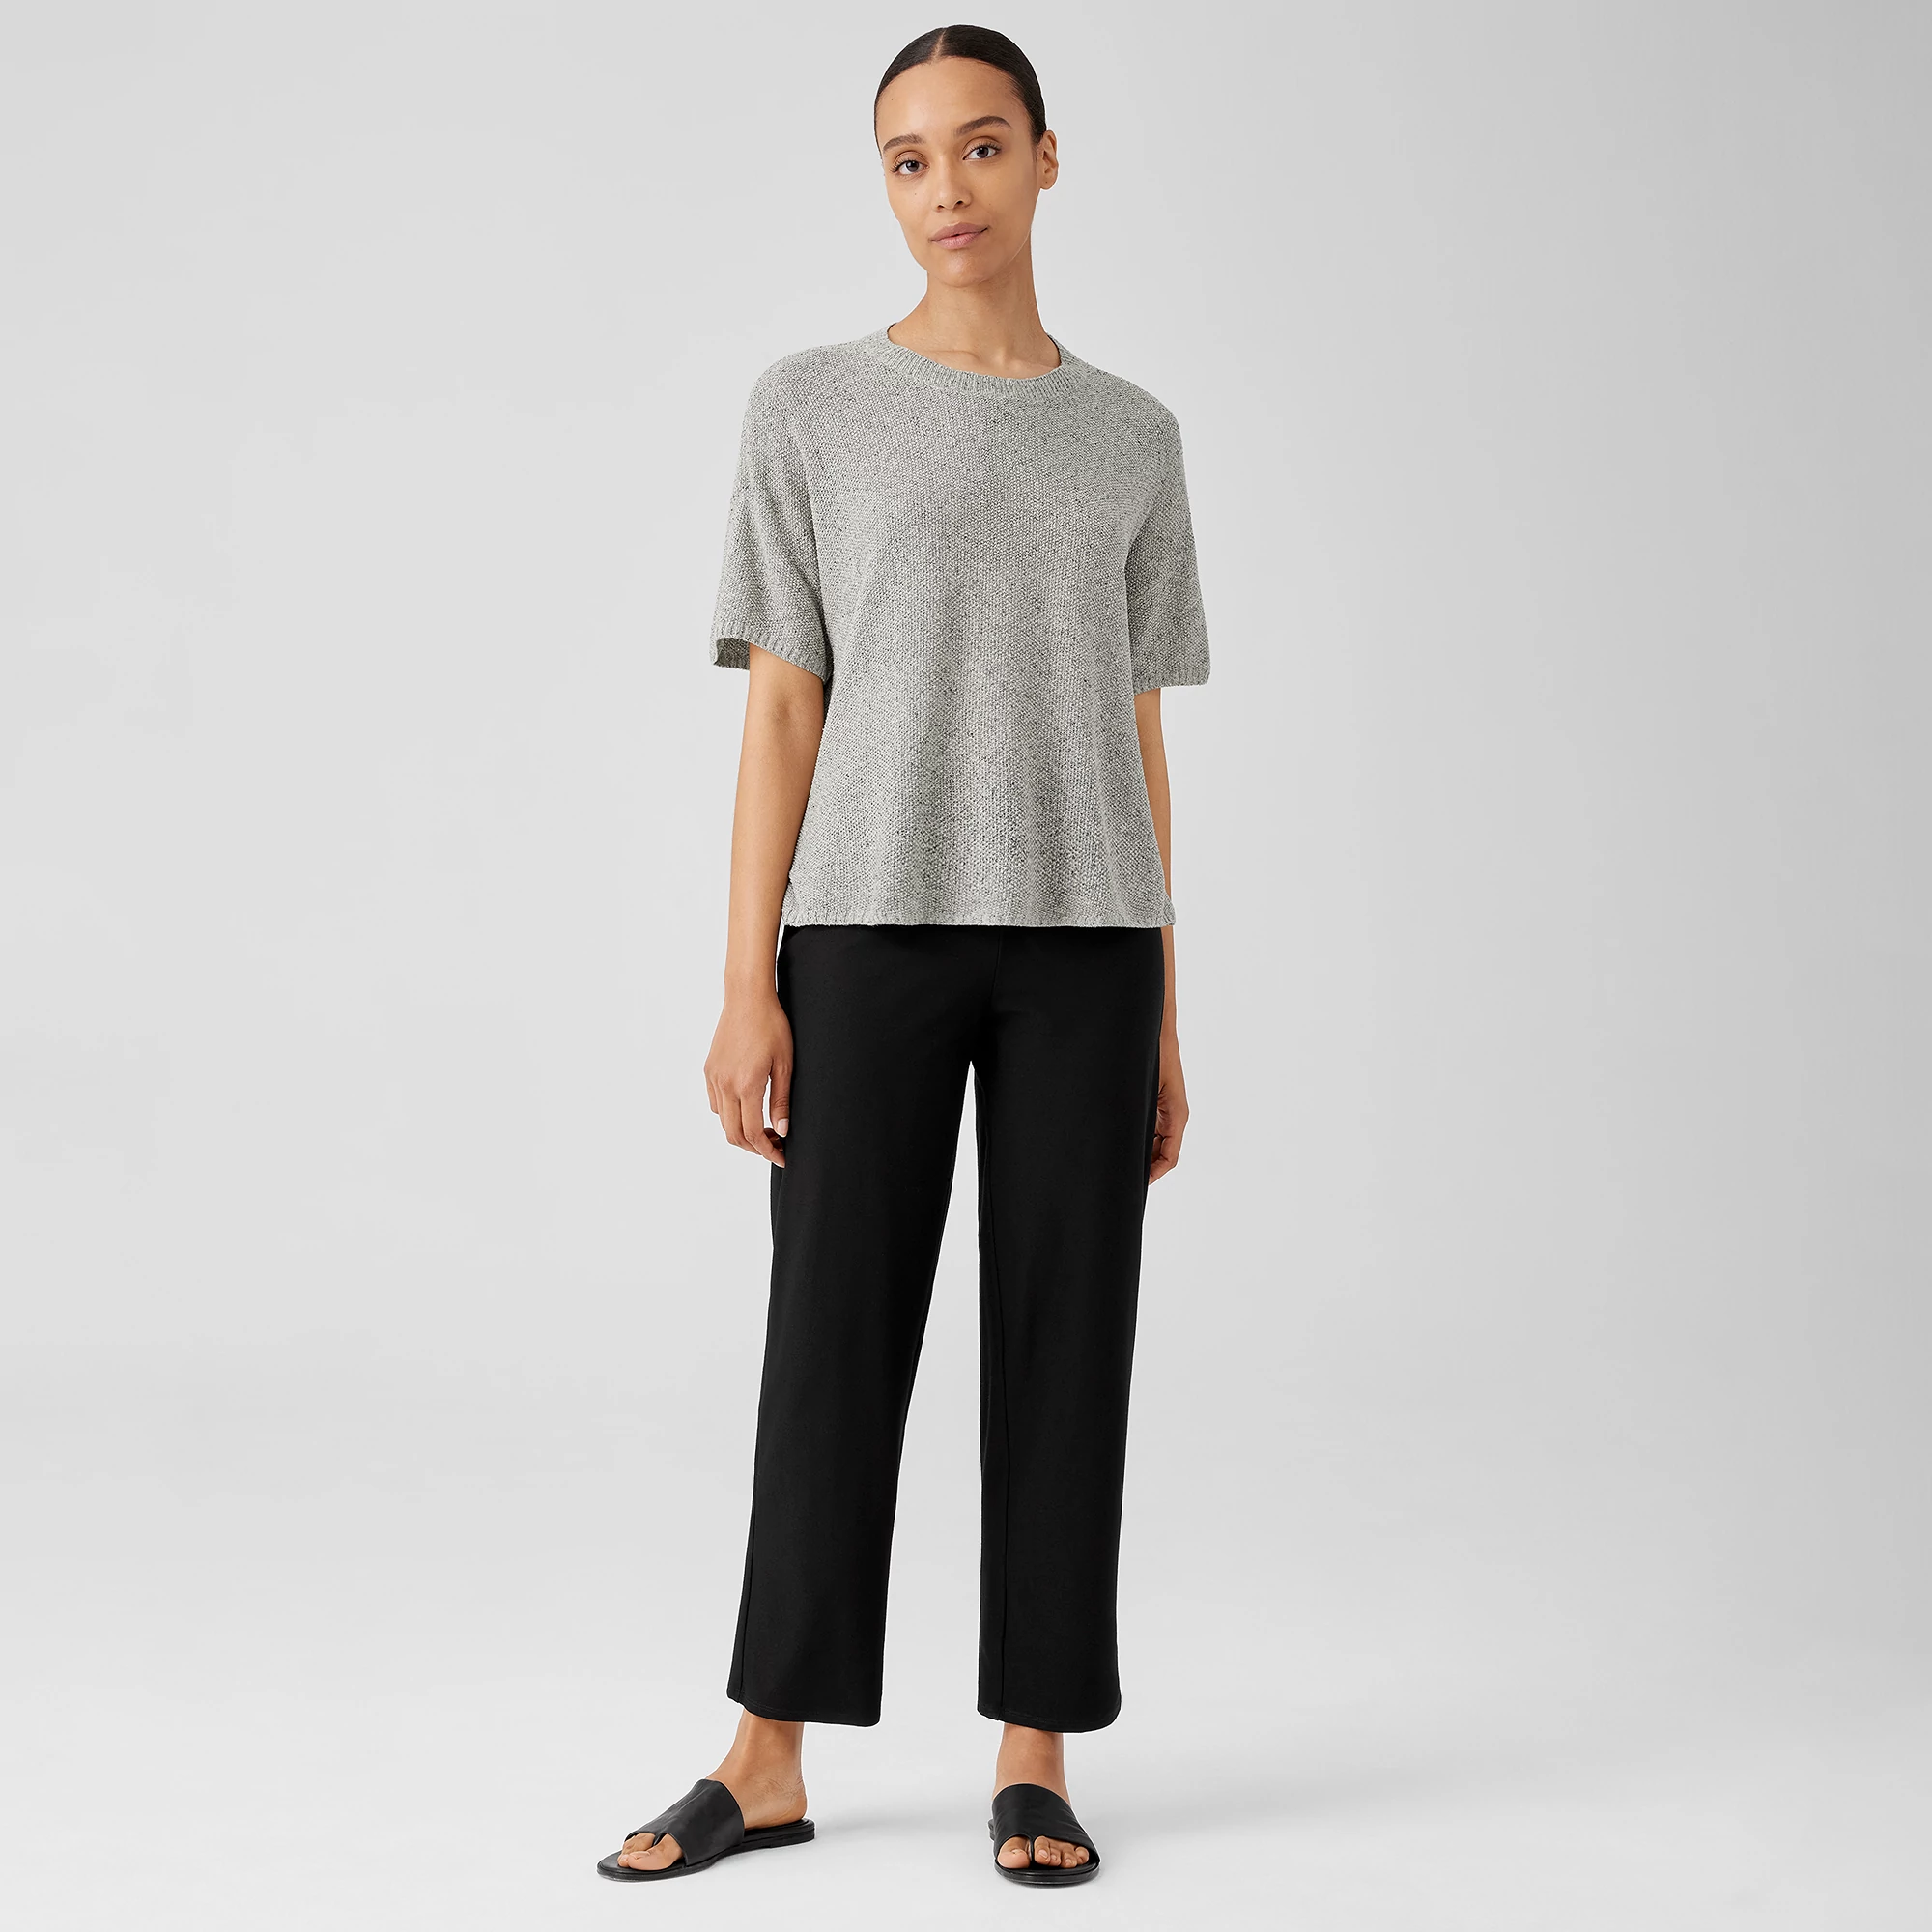 Eileen Fisher Cropped Stretch Crepe Pants